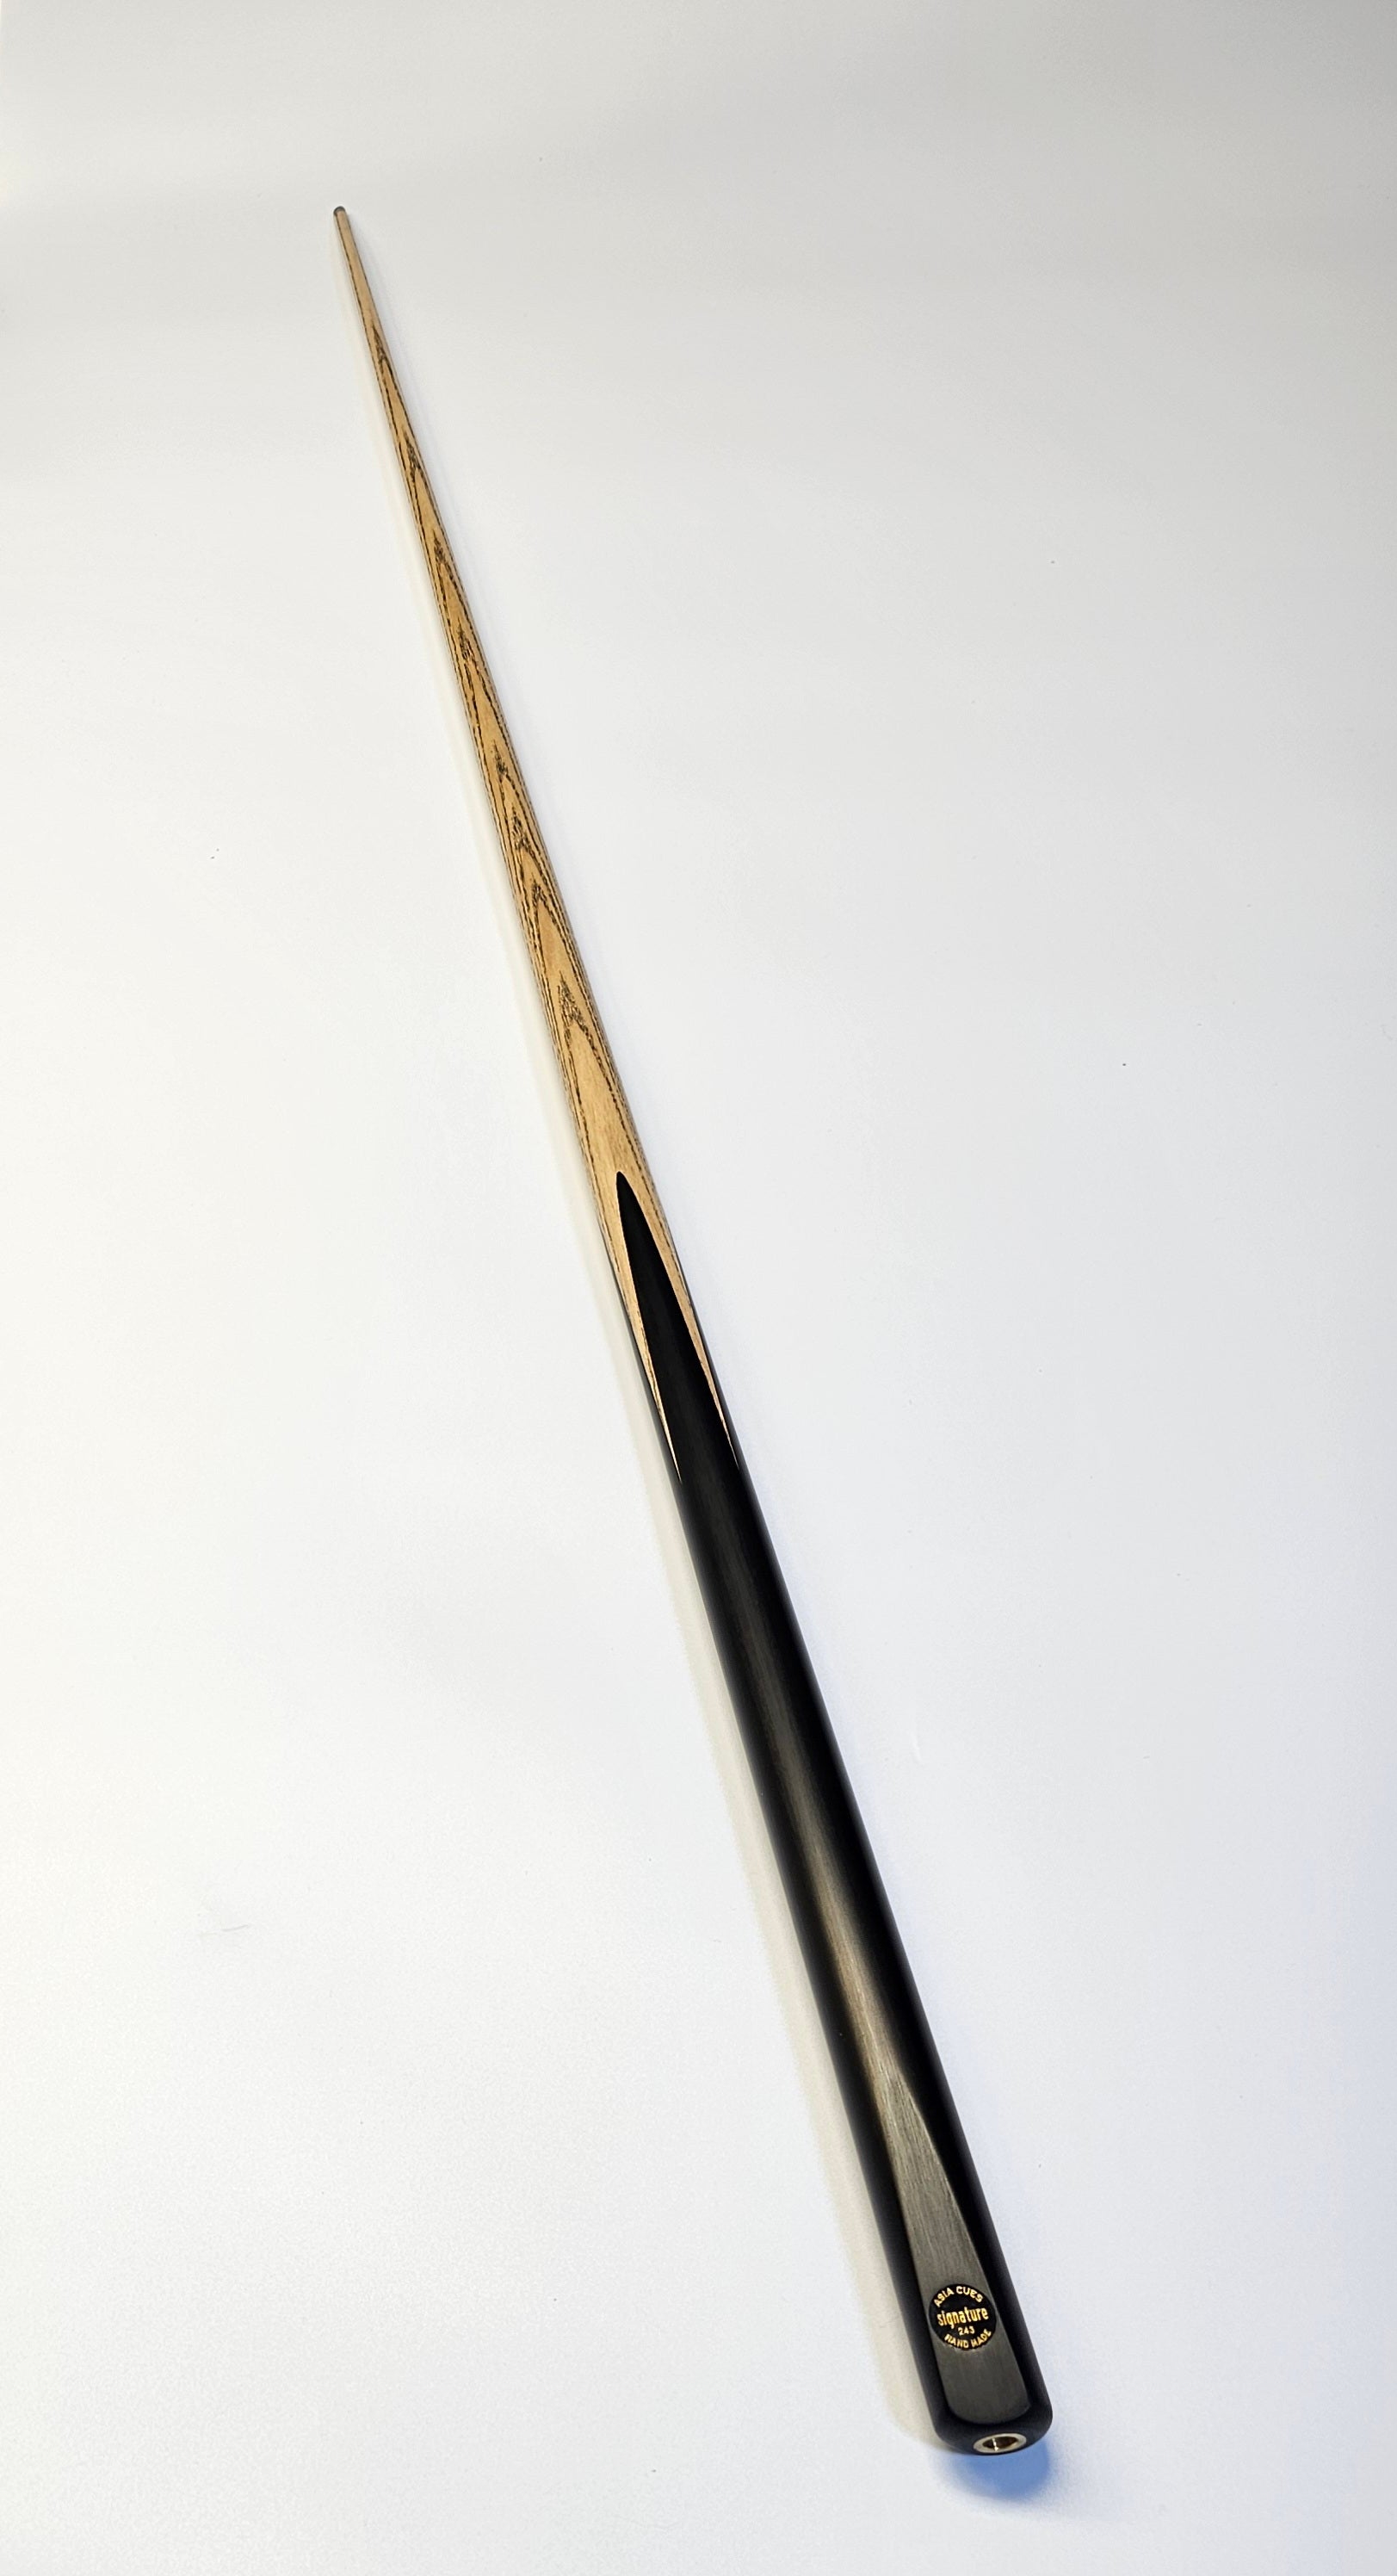 Asia Cues Signature No.243 - One Piece Snooker Cue 9.6mm, 17.8oz, 58"